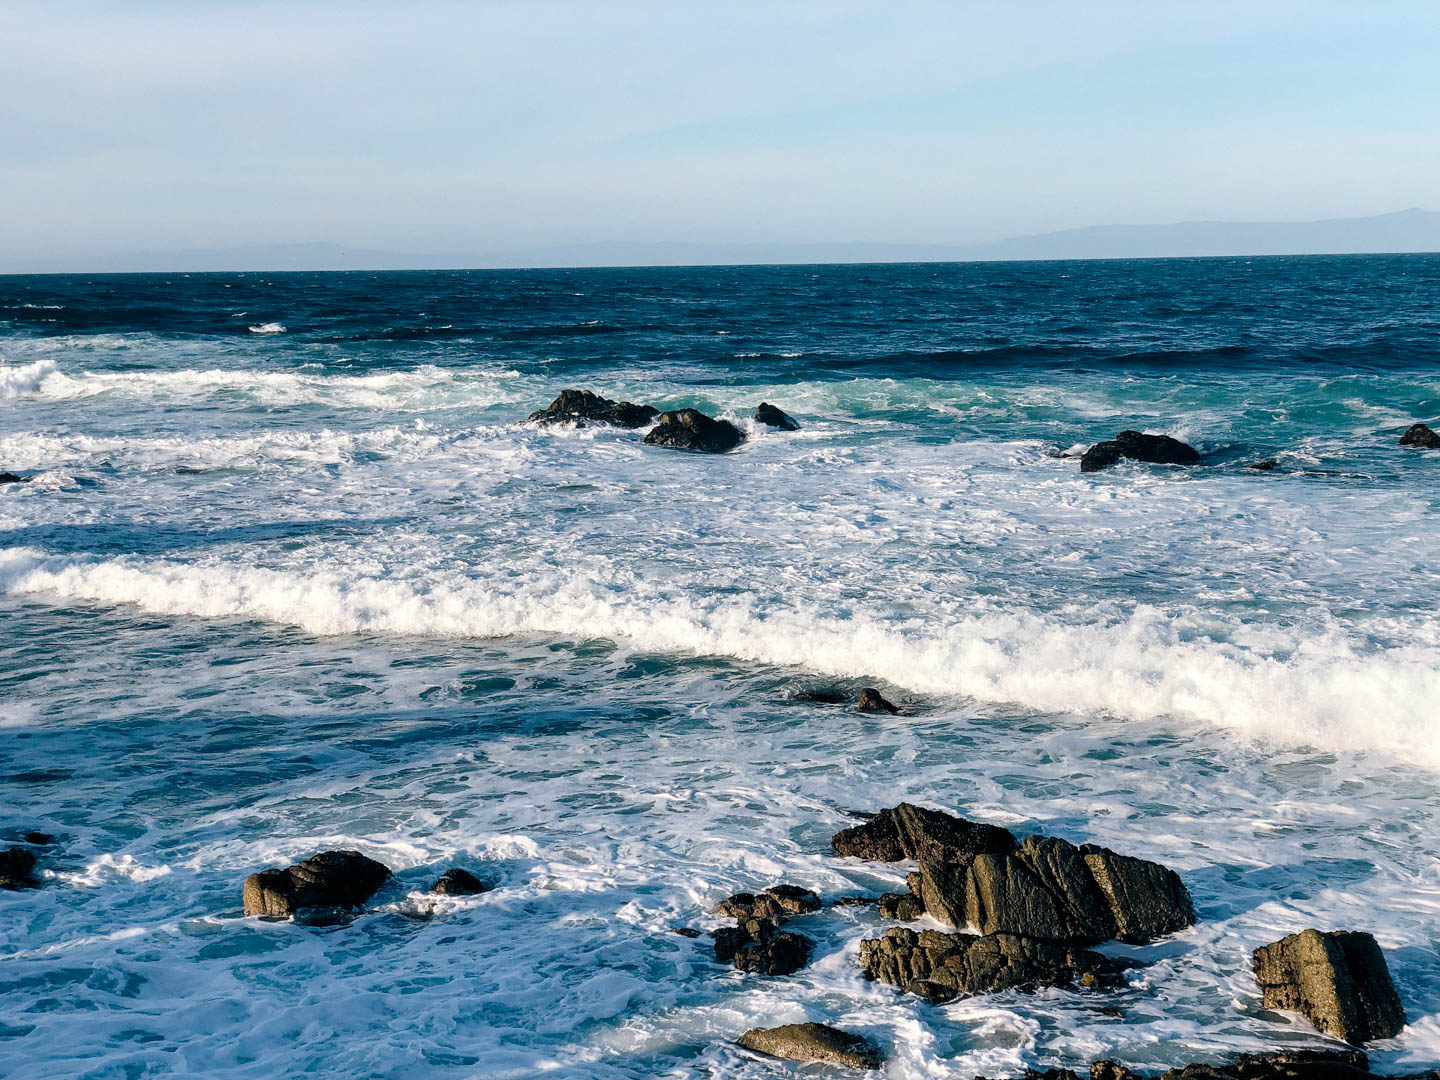 How to Spend a Weekend in Carmel and Pebble Beach - Lauren Campbell